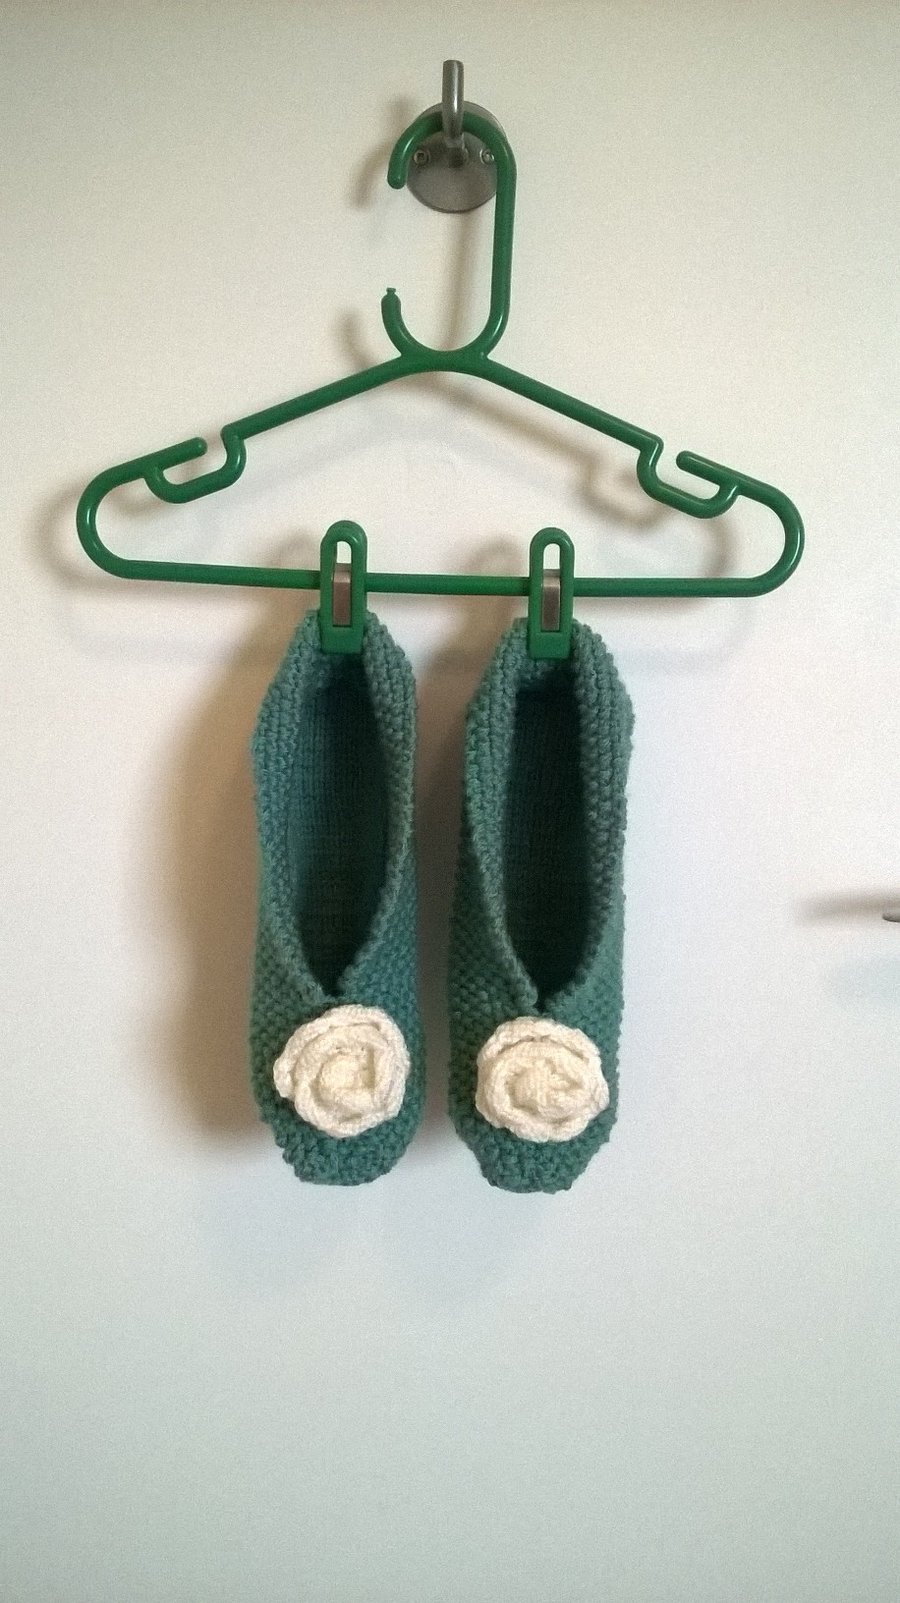 Handmade knitted slippers with a rose